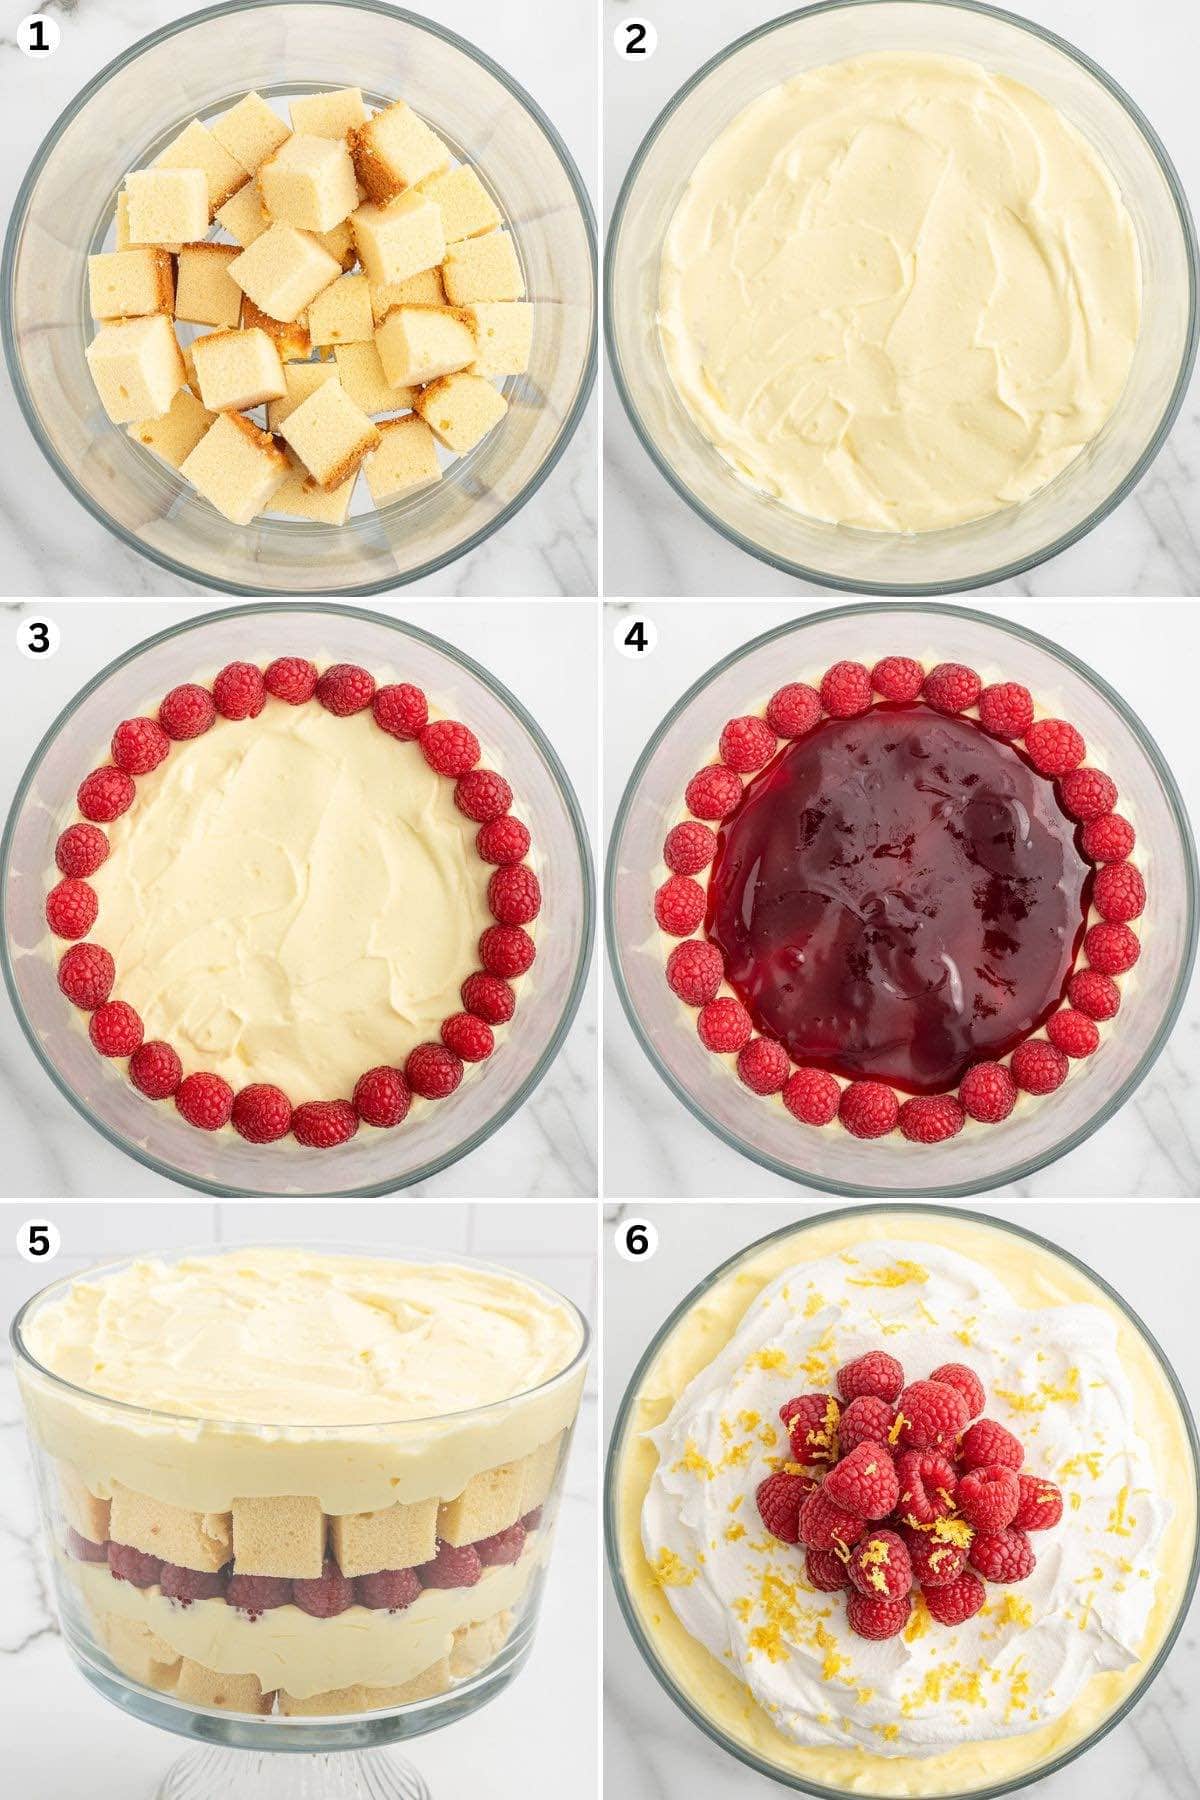 Place cubes of pound cake into the bottom of the trifle bowl. Add the pudding mixture. Arrange the raspberries in a circle around the outer edge of the bowl. Spread the jam in the middle over the pudding layer. Repeat the first and second step. Decorate with toppings.